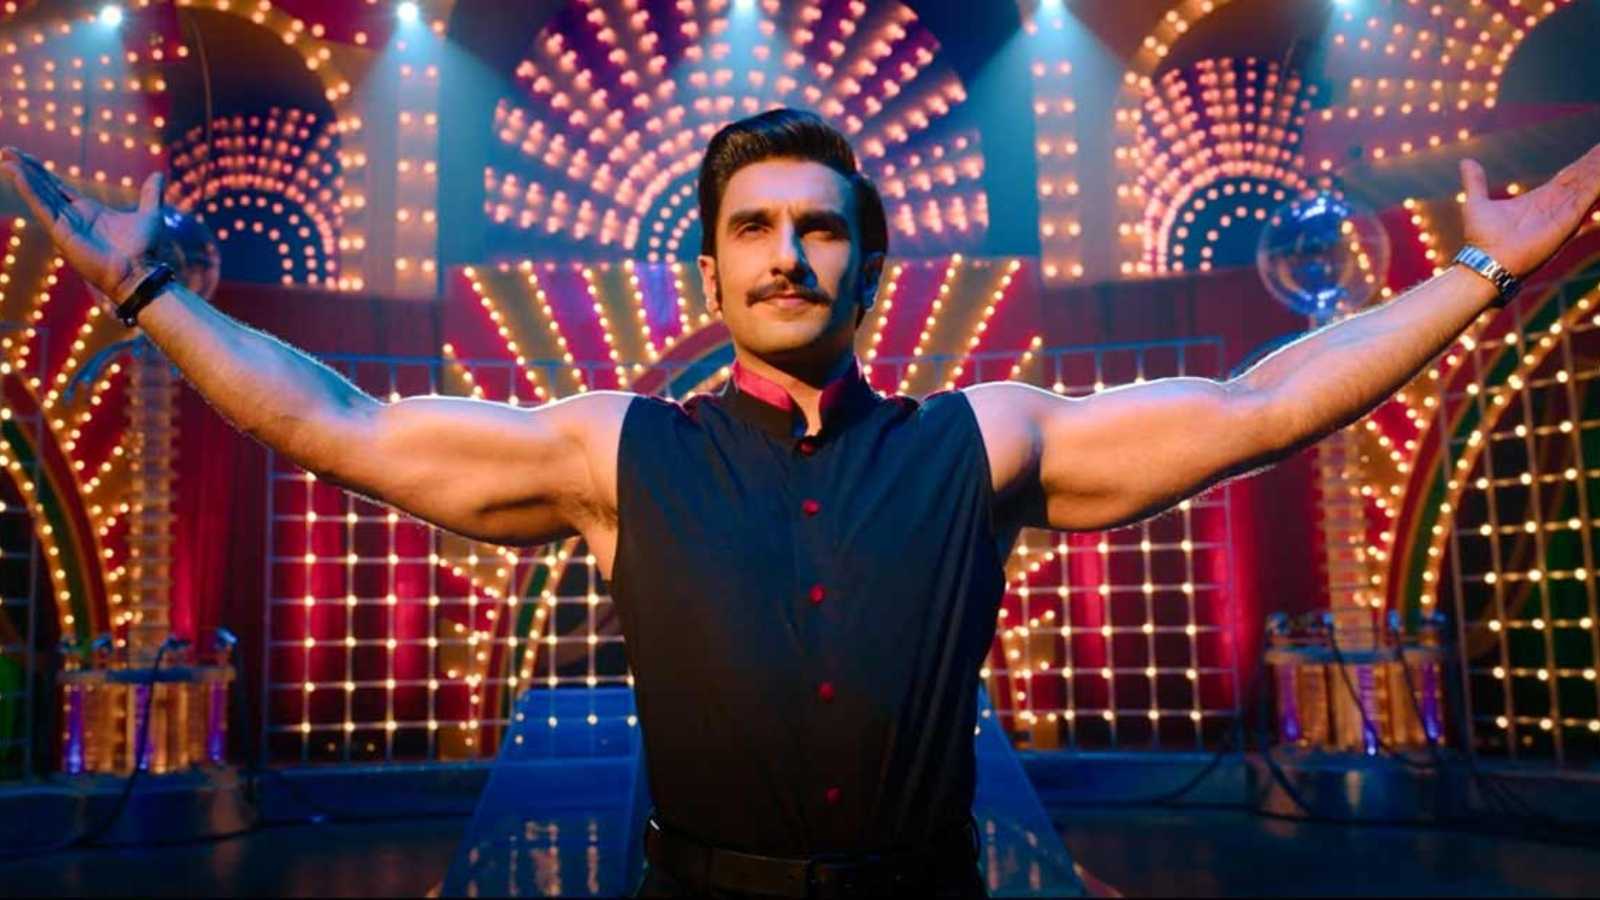 Ranveer Singh worked 20 hours a day to wrap up Simmba in time for his wedding with Deepika Padukone